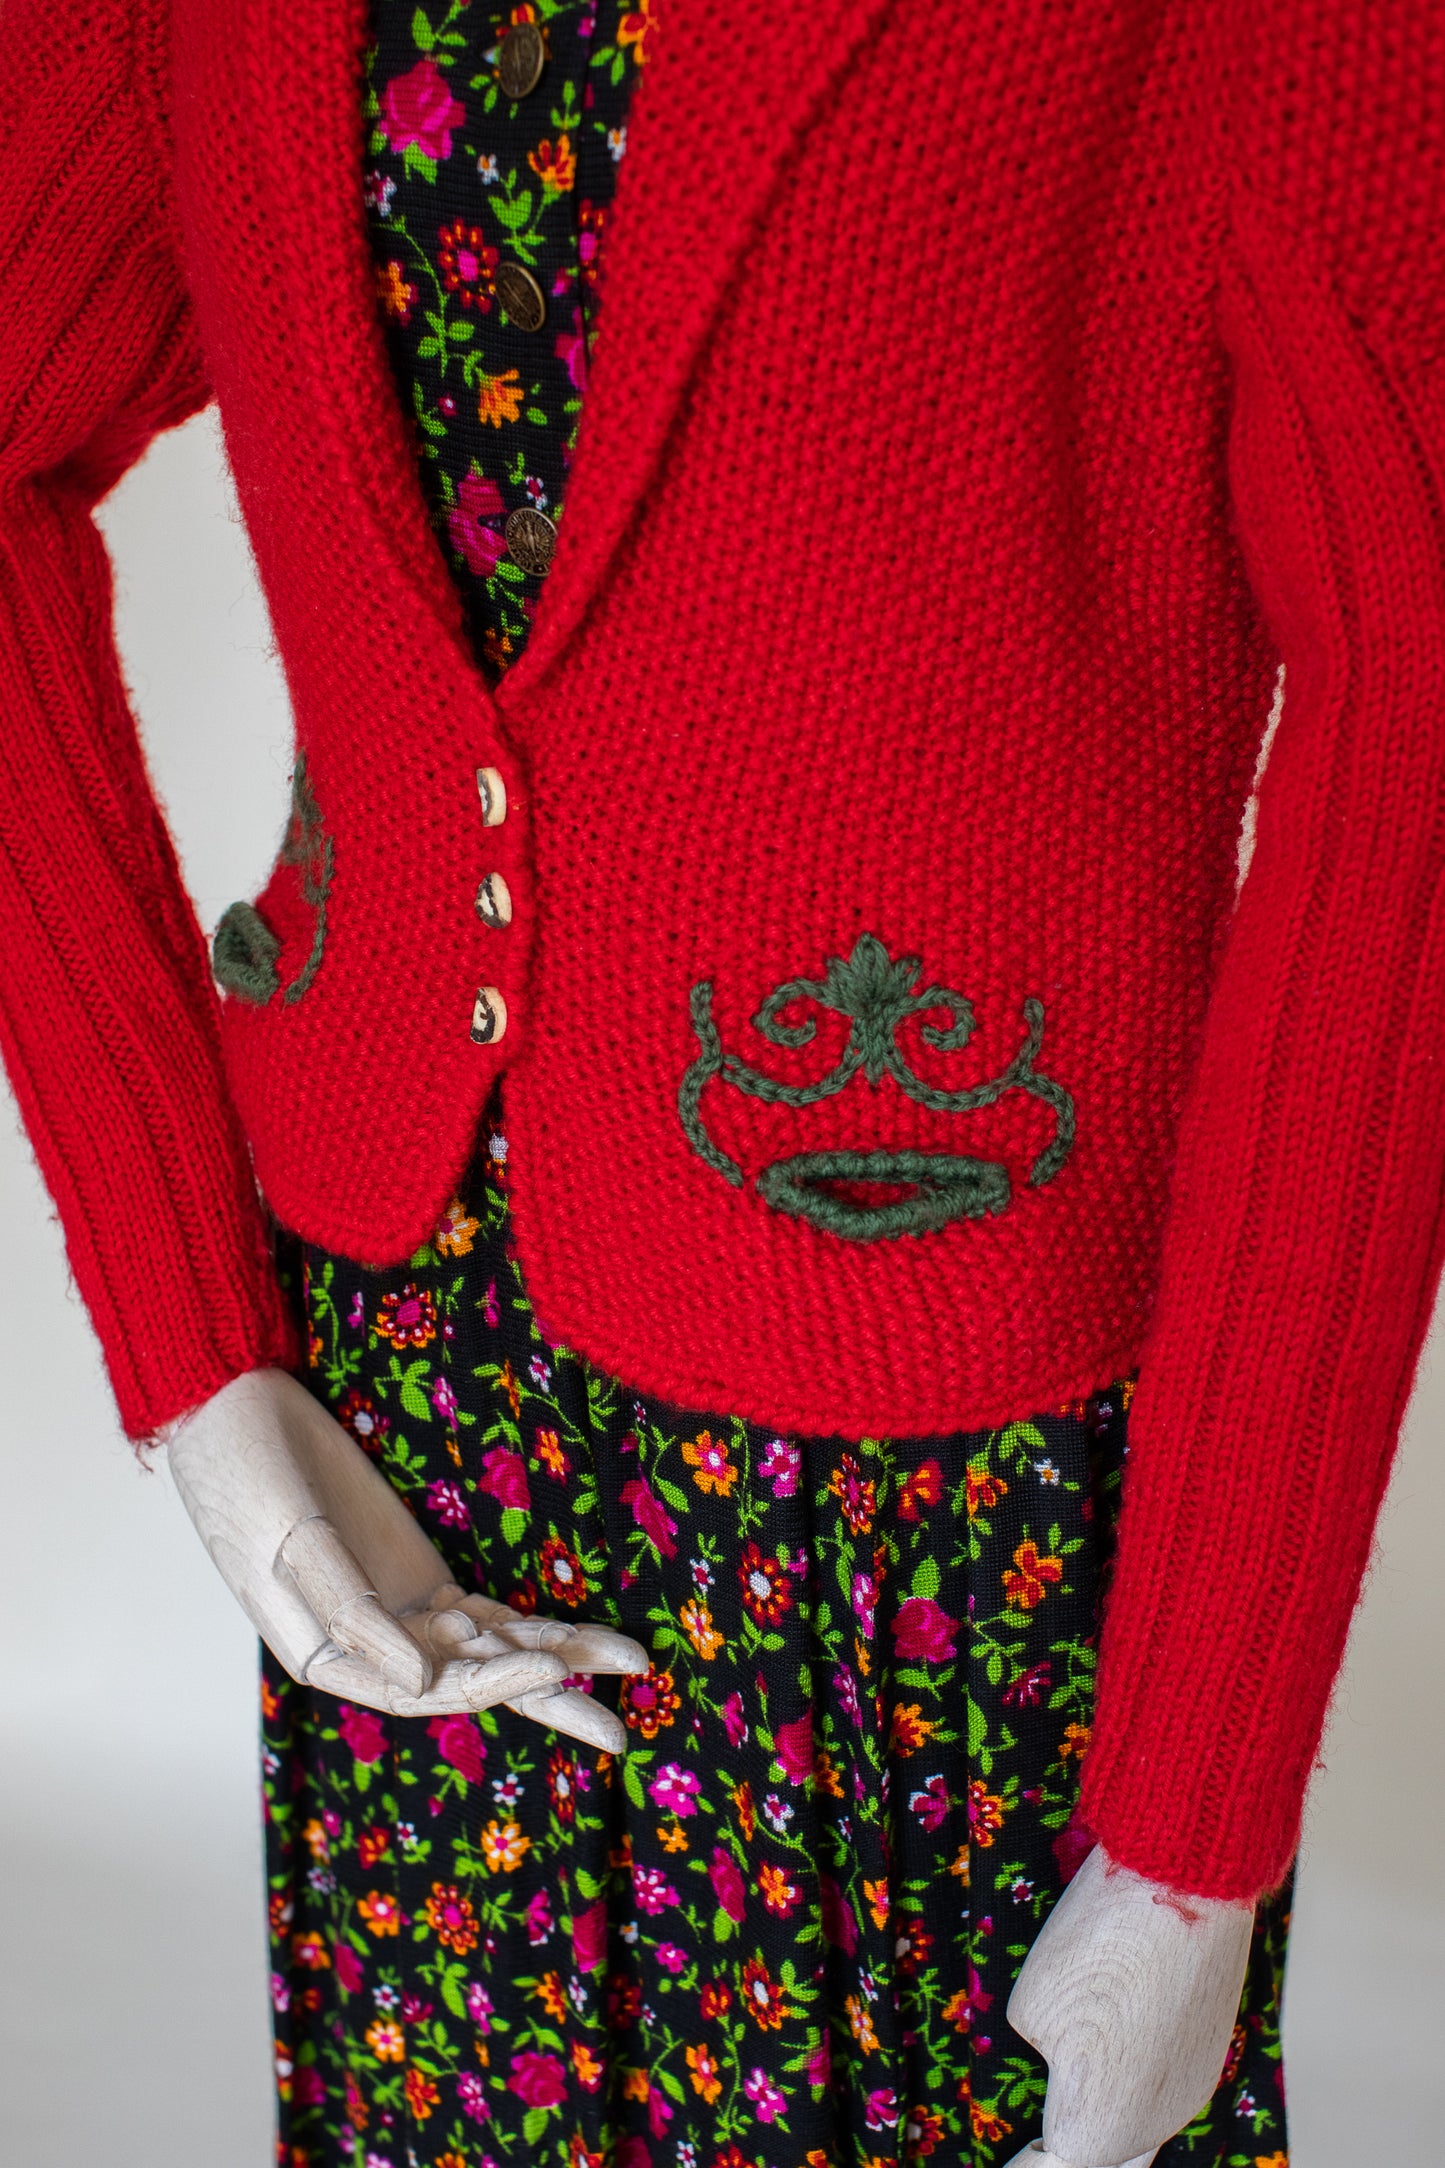 Vintage Red Hand Knitted Austrian Cardigan with a Green Trim Size S-M